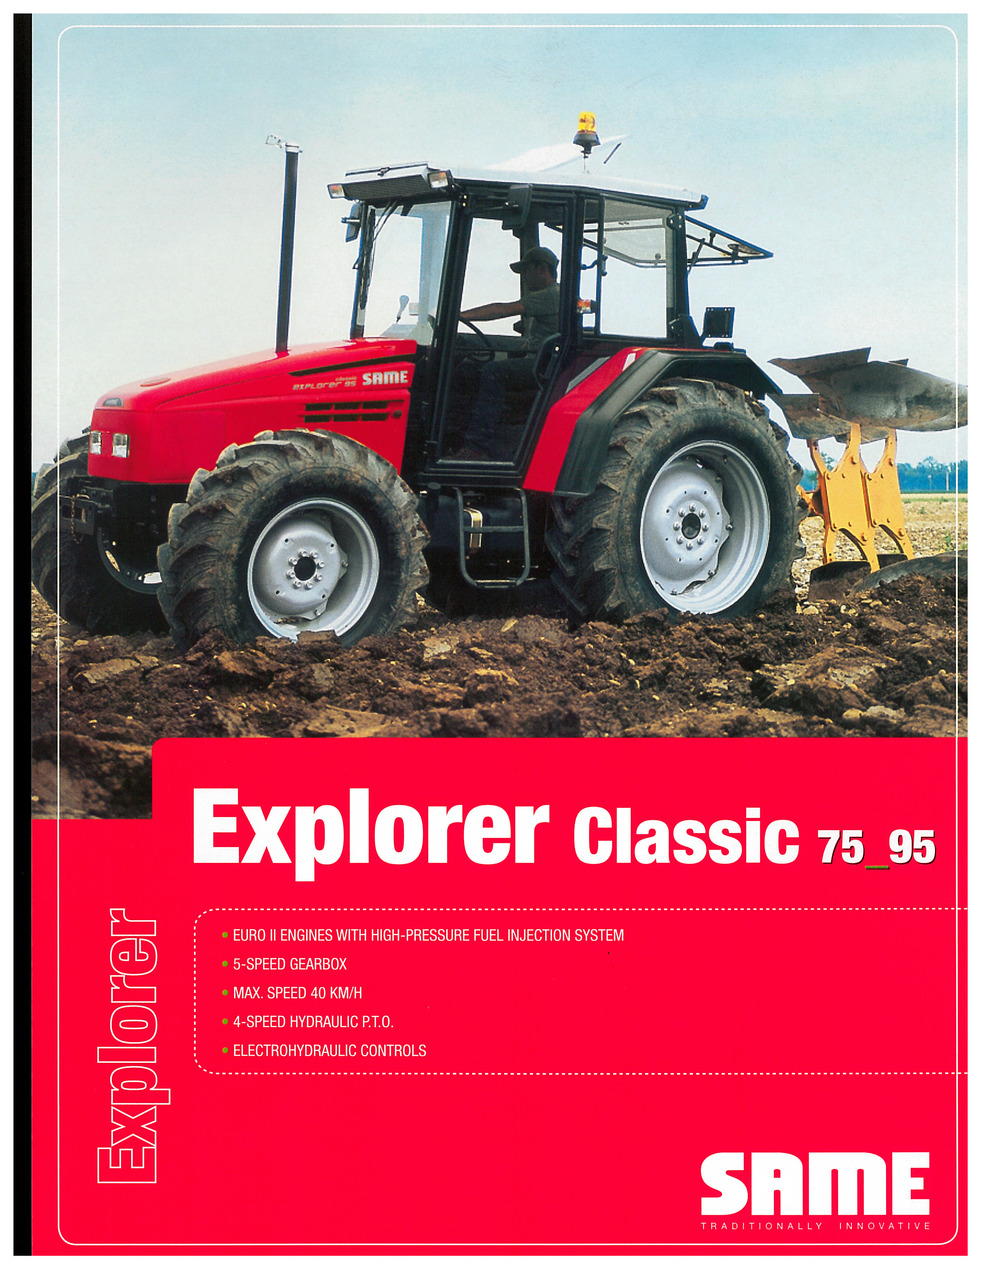 ... reference sam gb p d 2005 3 product same explorer classic 75 95